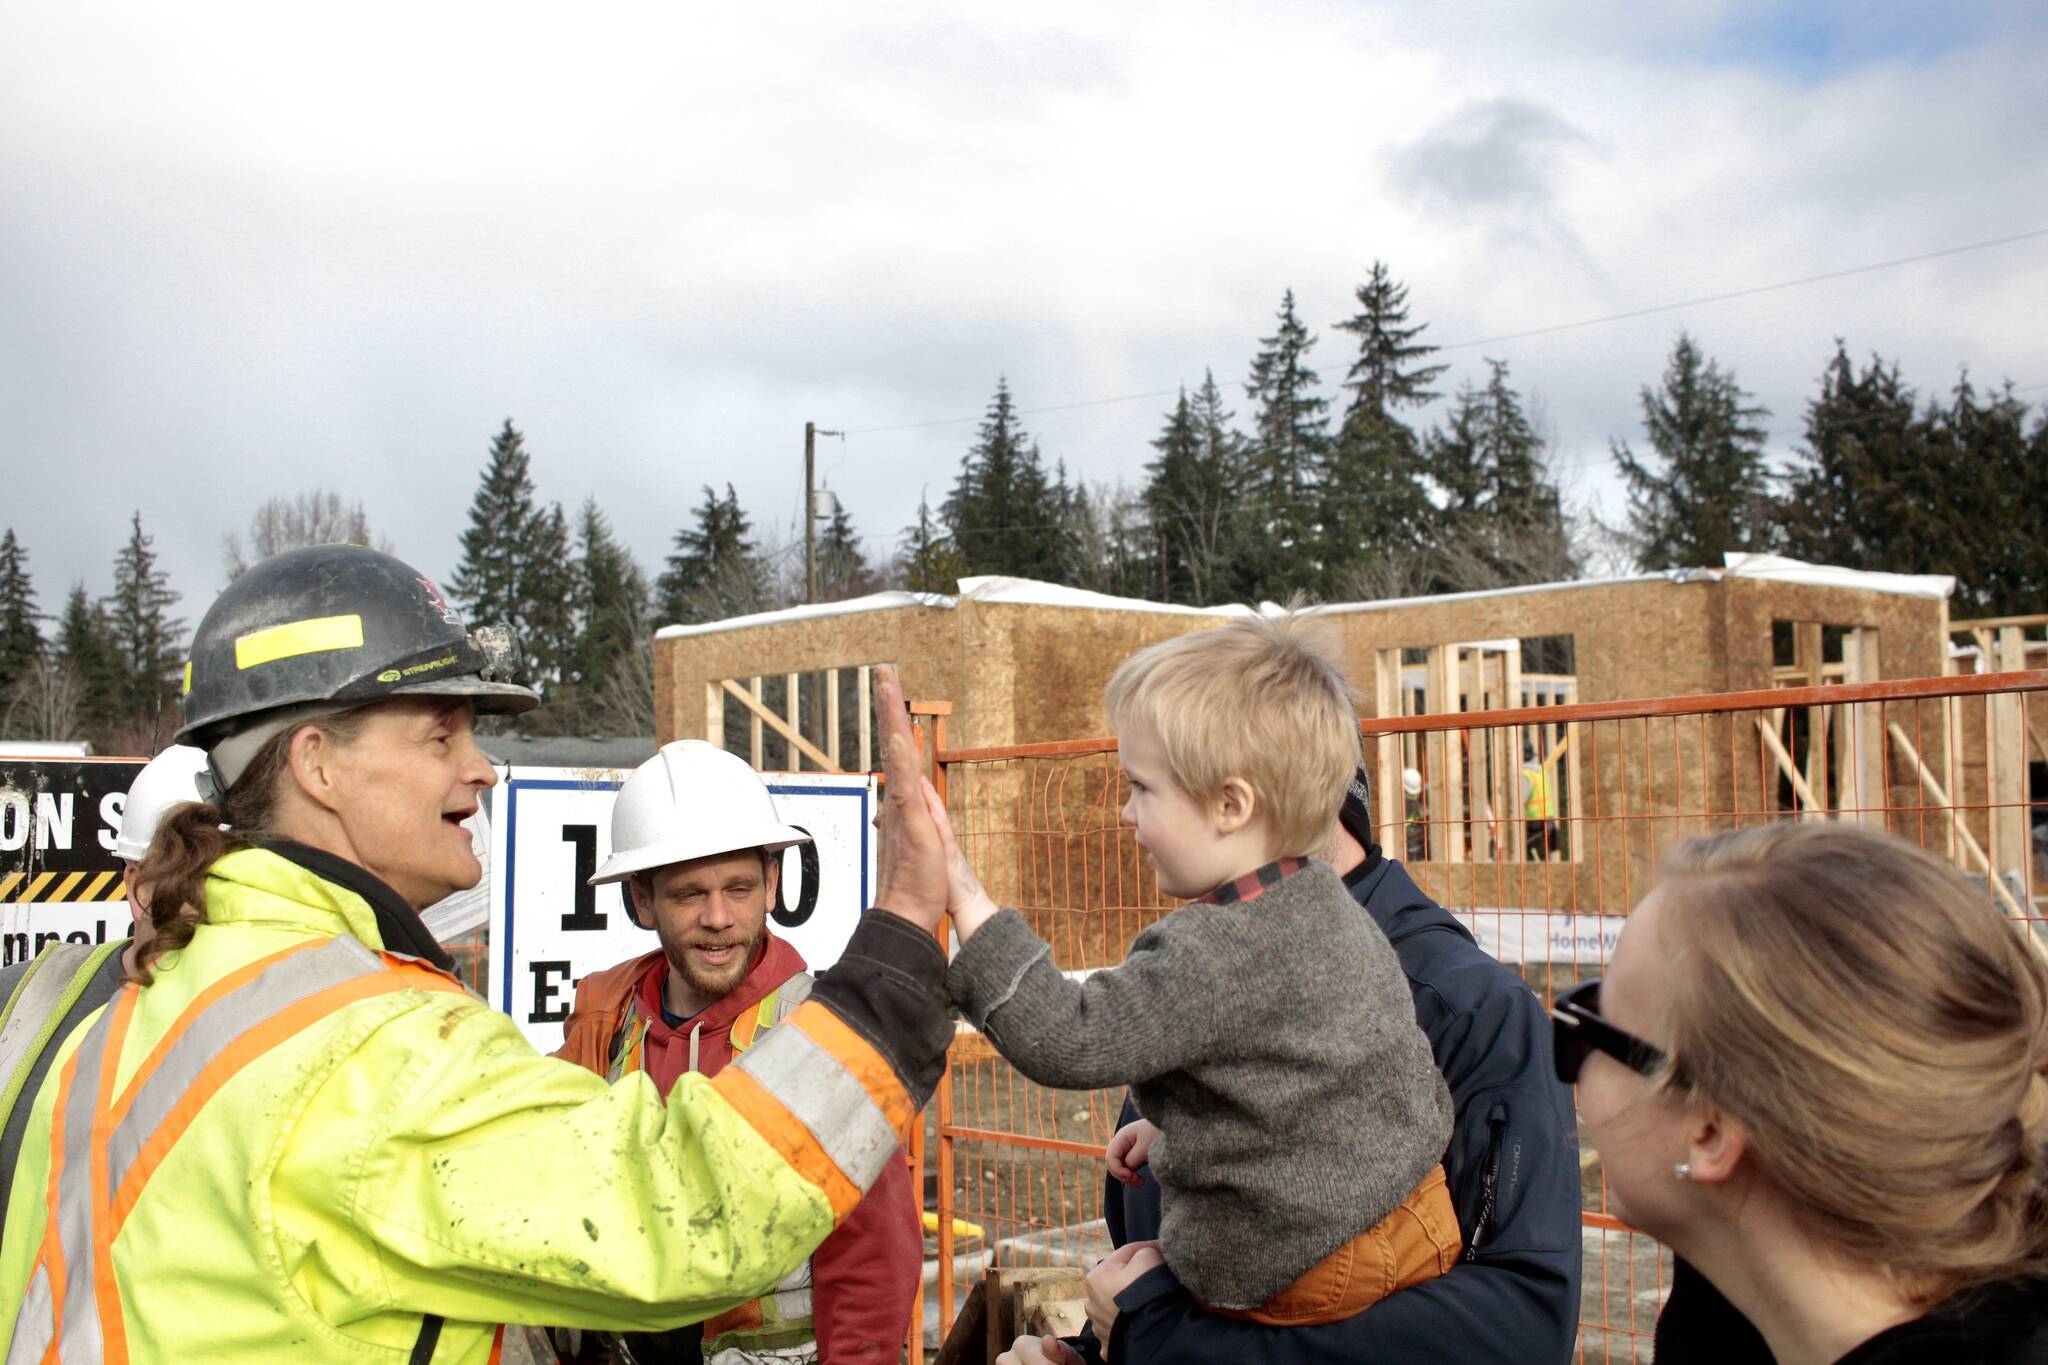 Phil Hillier (right) high fives a construction worker on Hillier’s third birthday. Photo by Marc Kitteringham/Campbell River Mirror